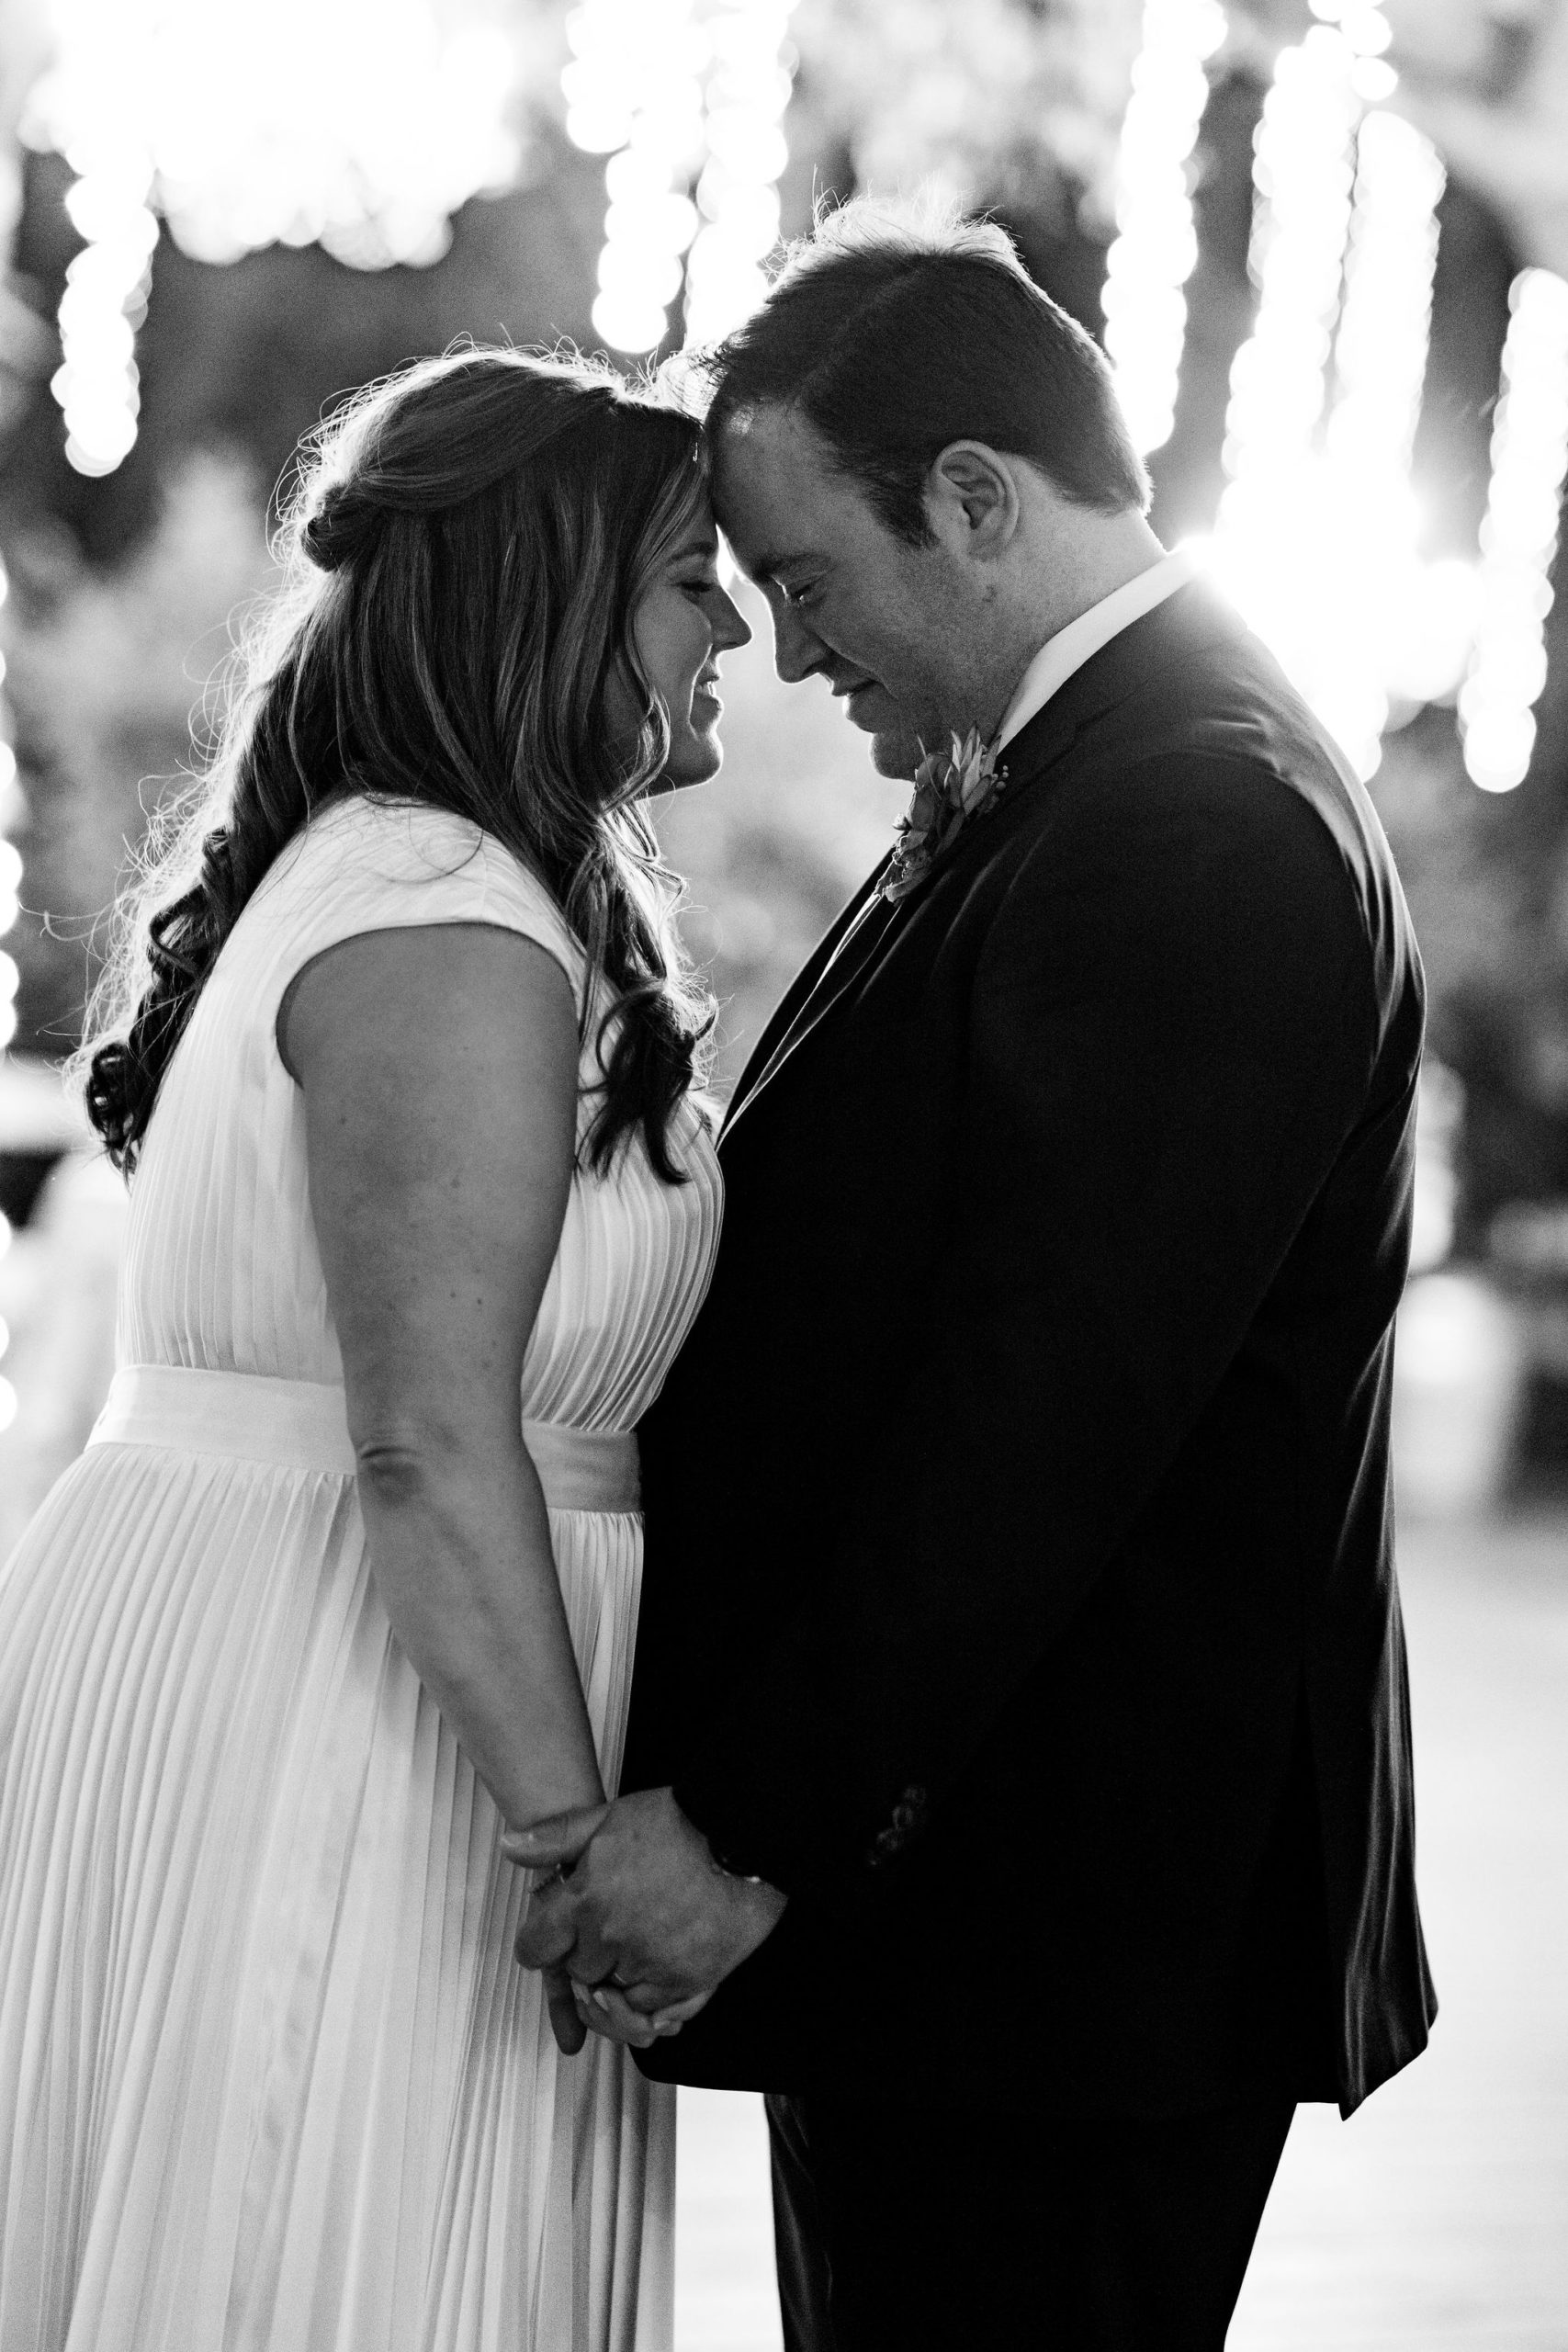 black and white photo of bride and groom with lights blurred in background